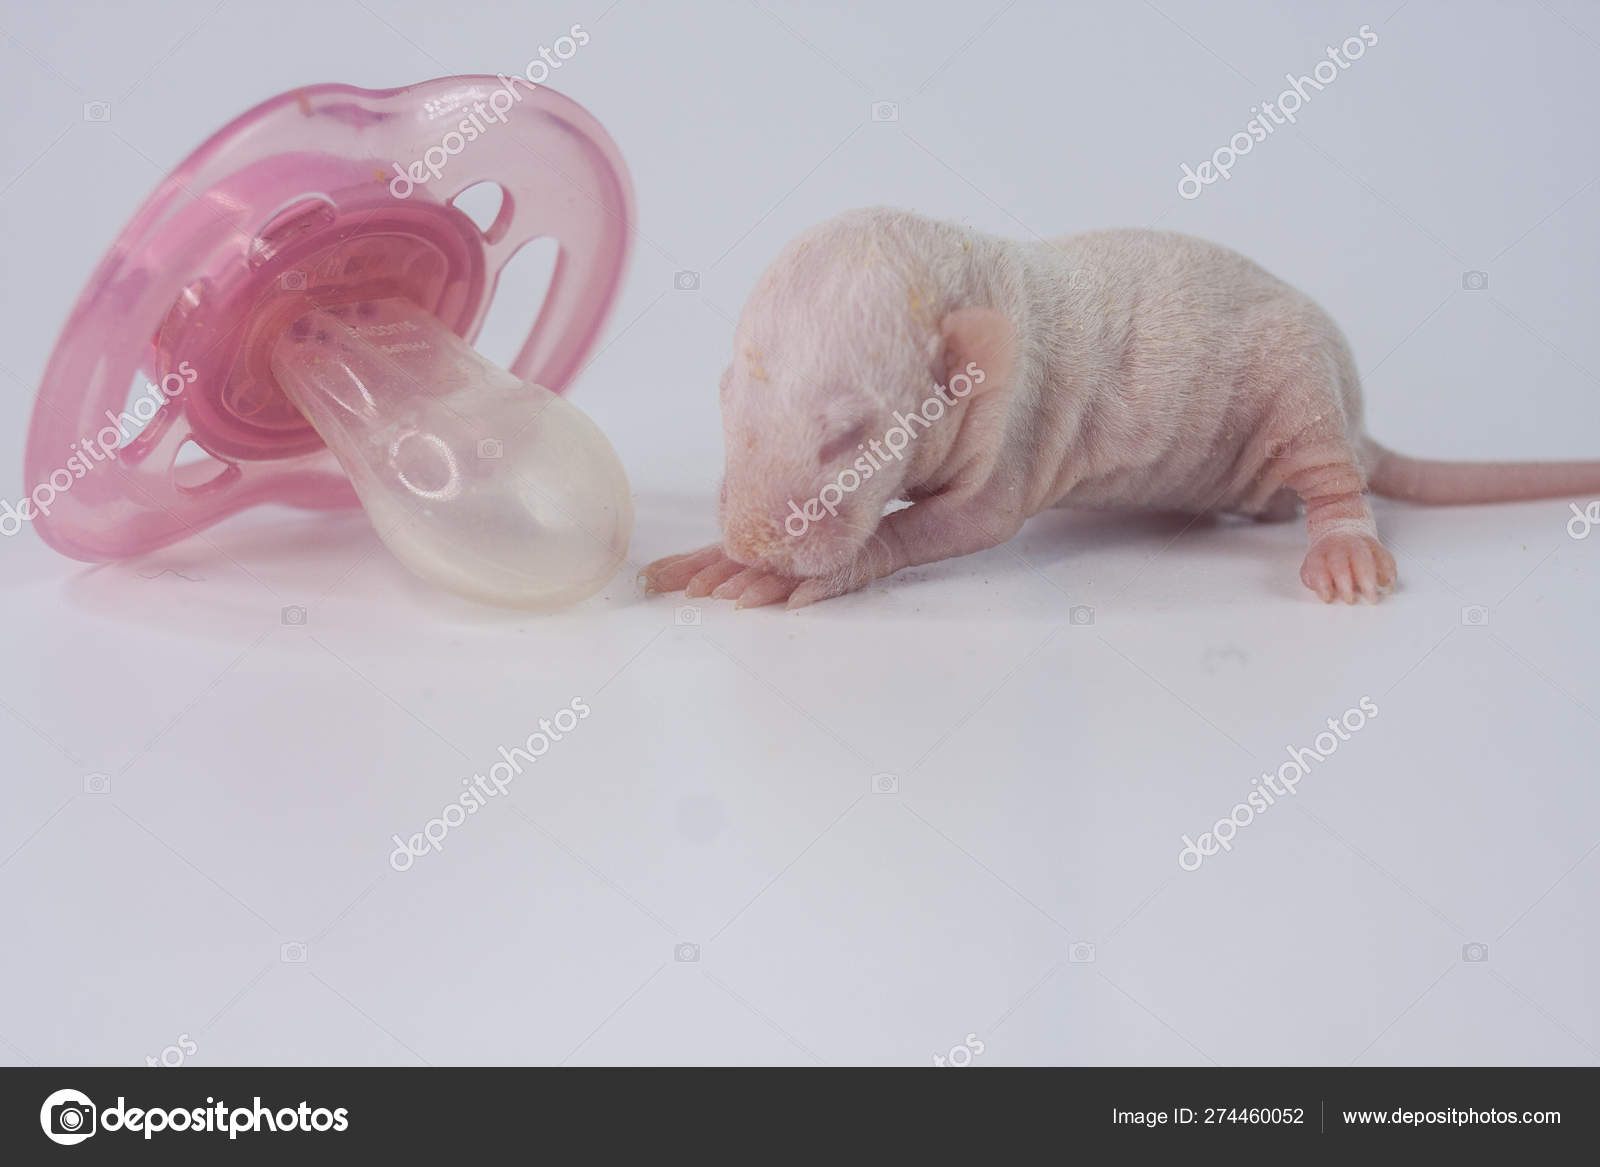 The Concept Of Child Development Little Rat On The Background Of The Baby S Nipples Stock Photo Image By C Xxxenium7